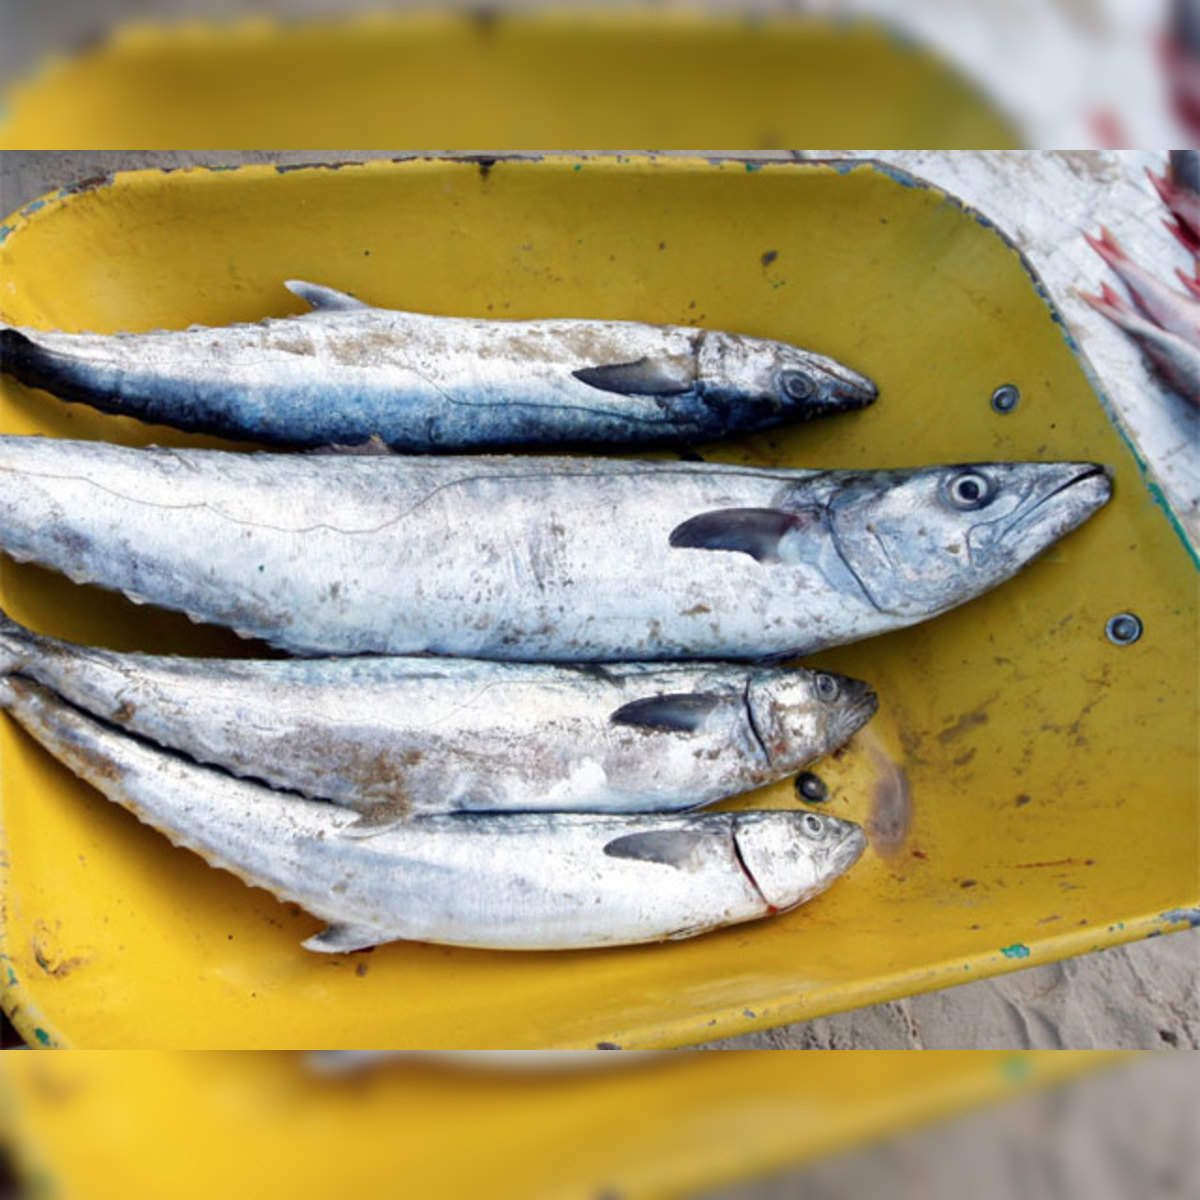 fish: India's marine fish catches record 6.6 % rise in 2016 - The